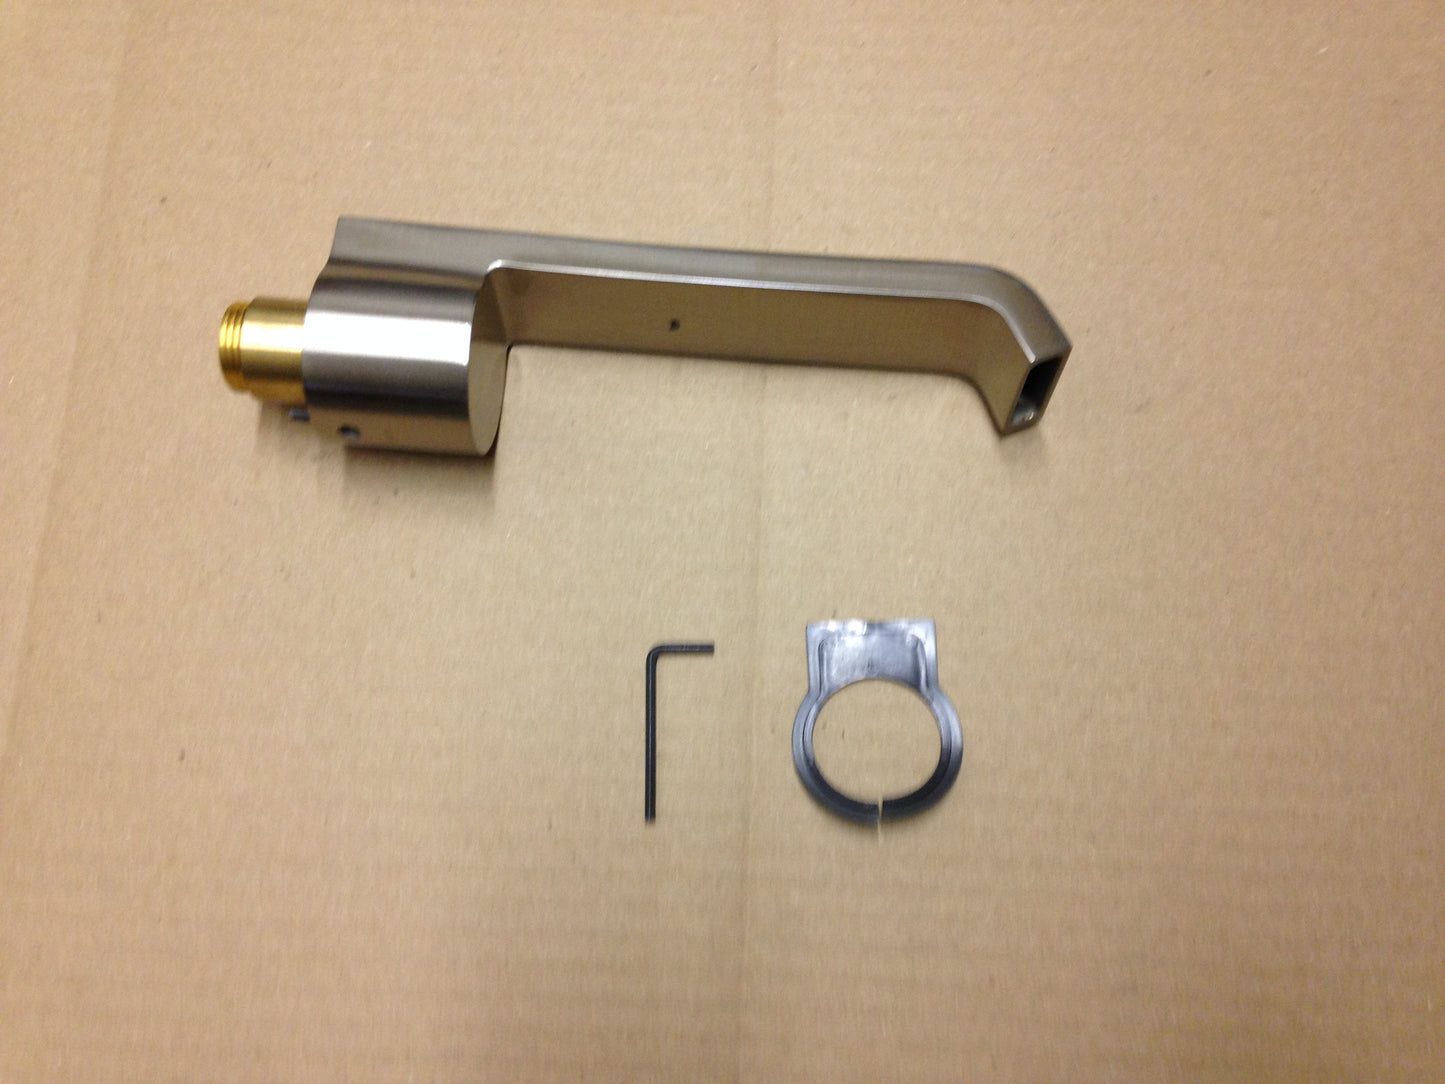 "REM" WALL TUB SPOUT, BRUSHED NICKEL